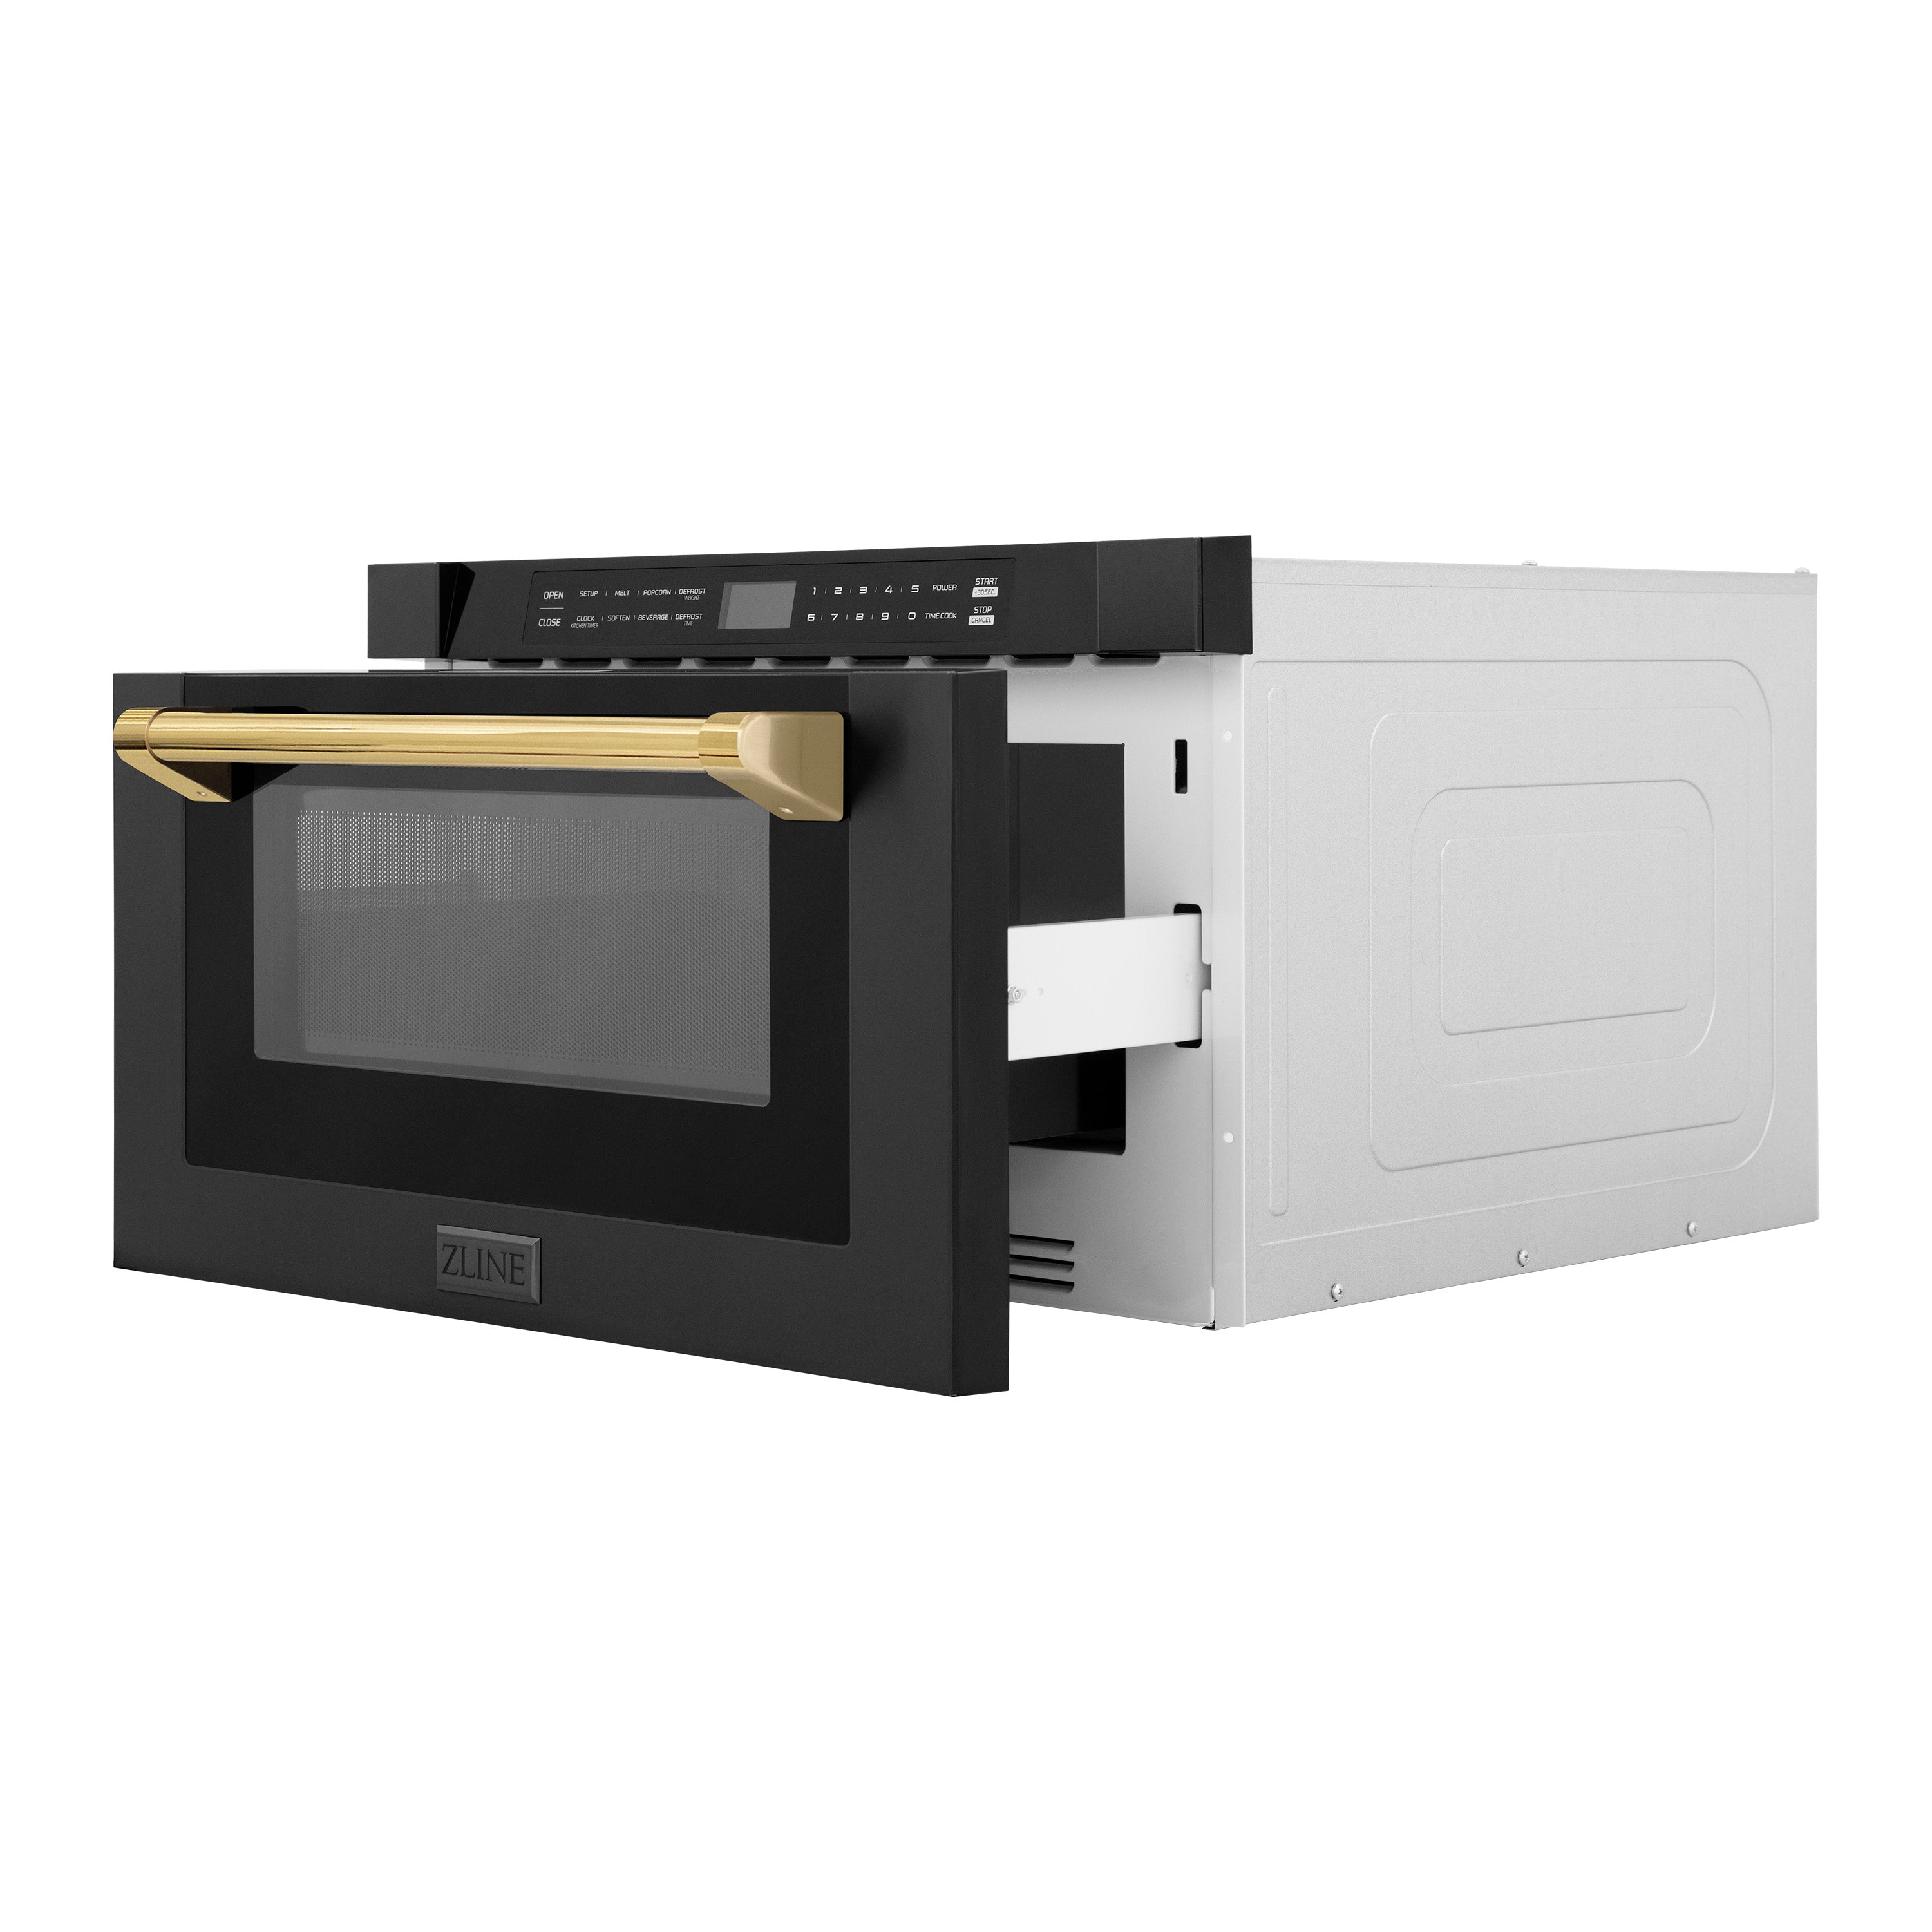 ZLINE Autograph Edition 24 in. 1.2 cu. ft. Built-in Microwave Drawer in Black Stainless Steel with Gold Accents (MWDZ-1-BS-H-G) Side View Drawer Open